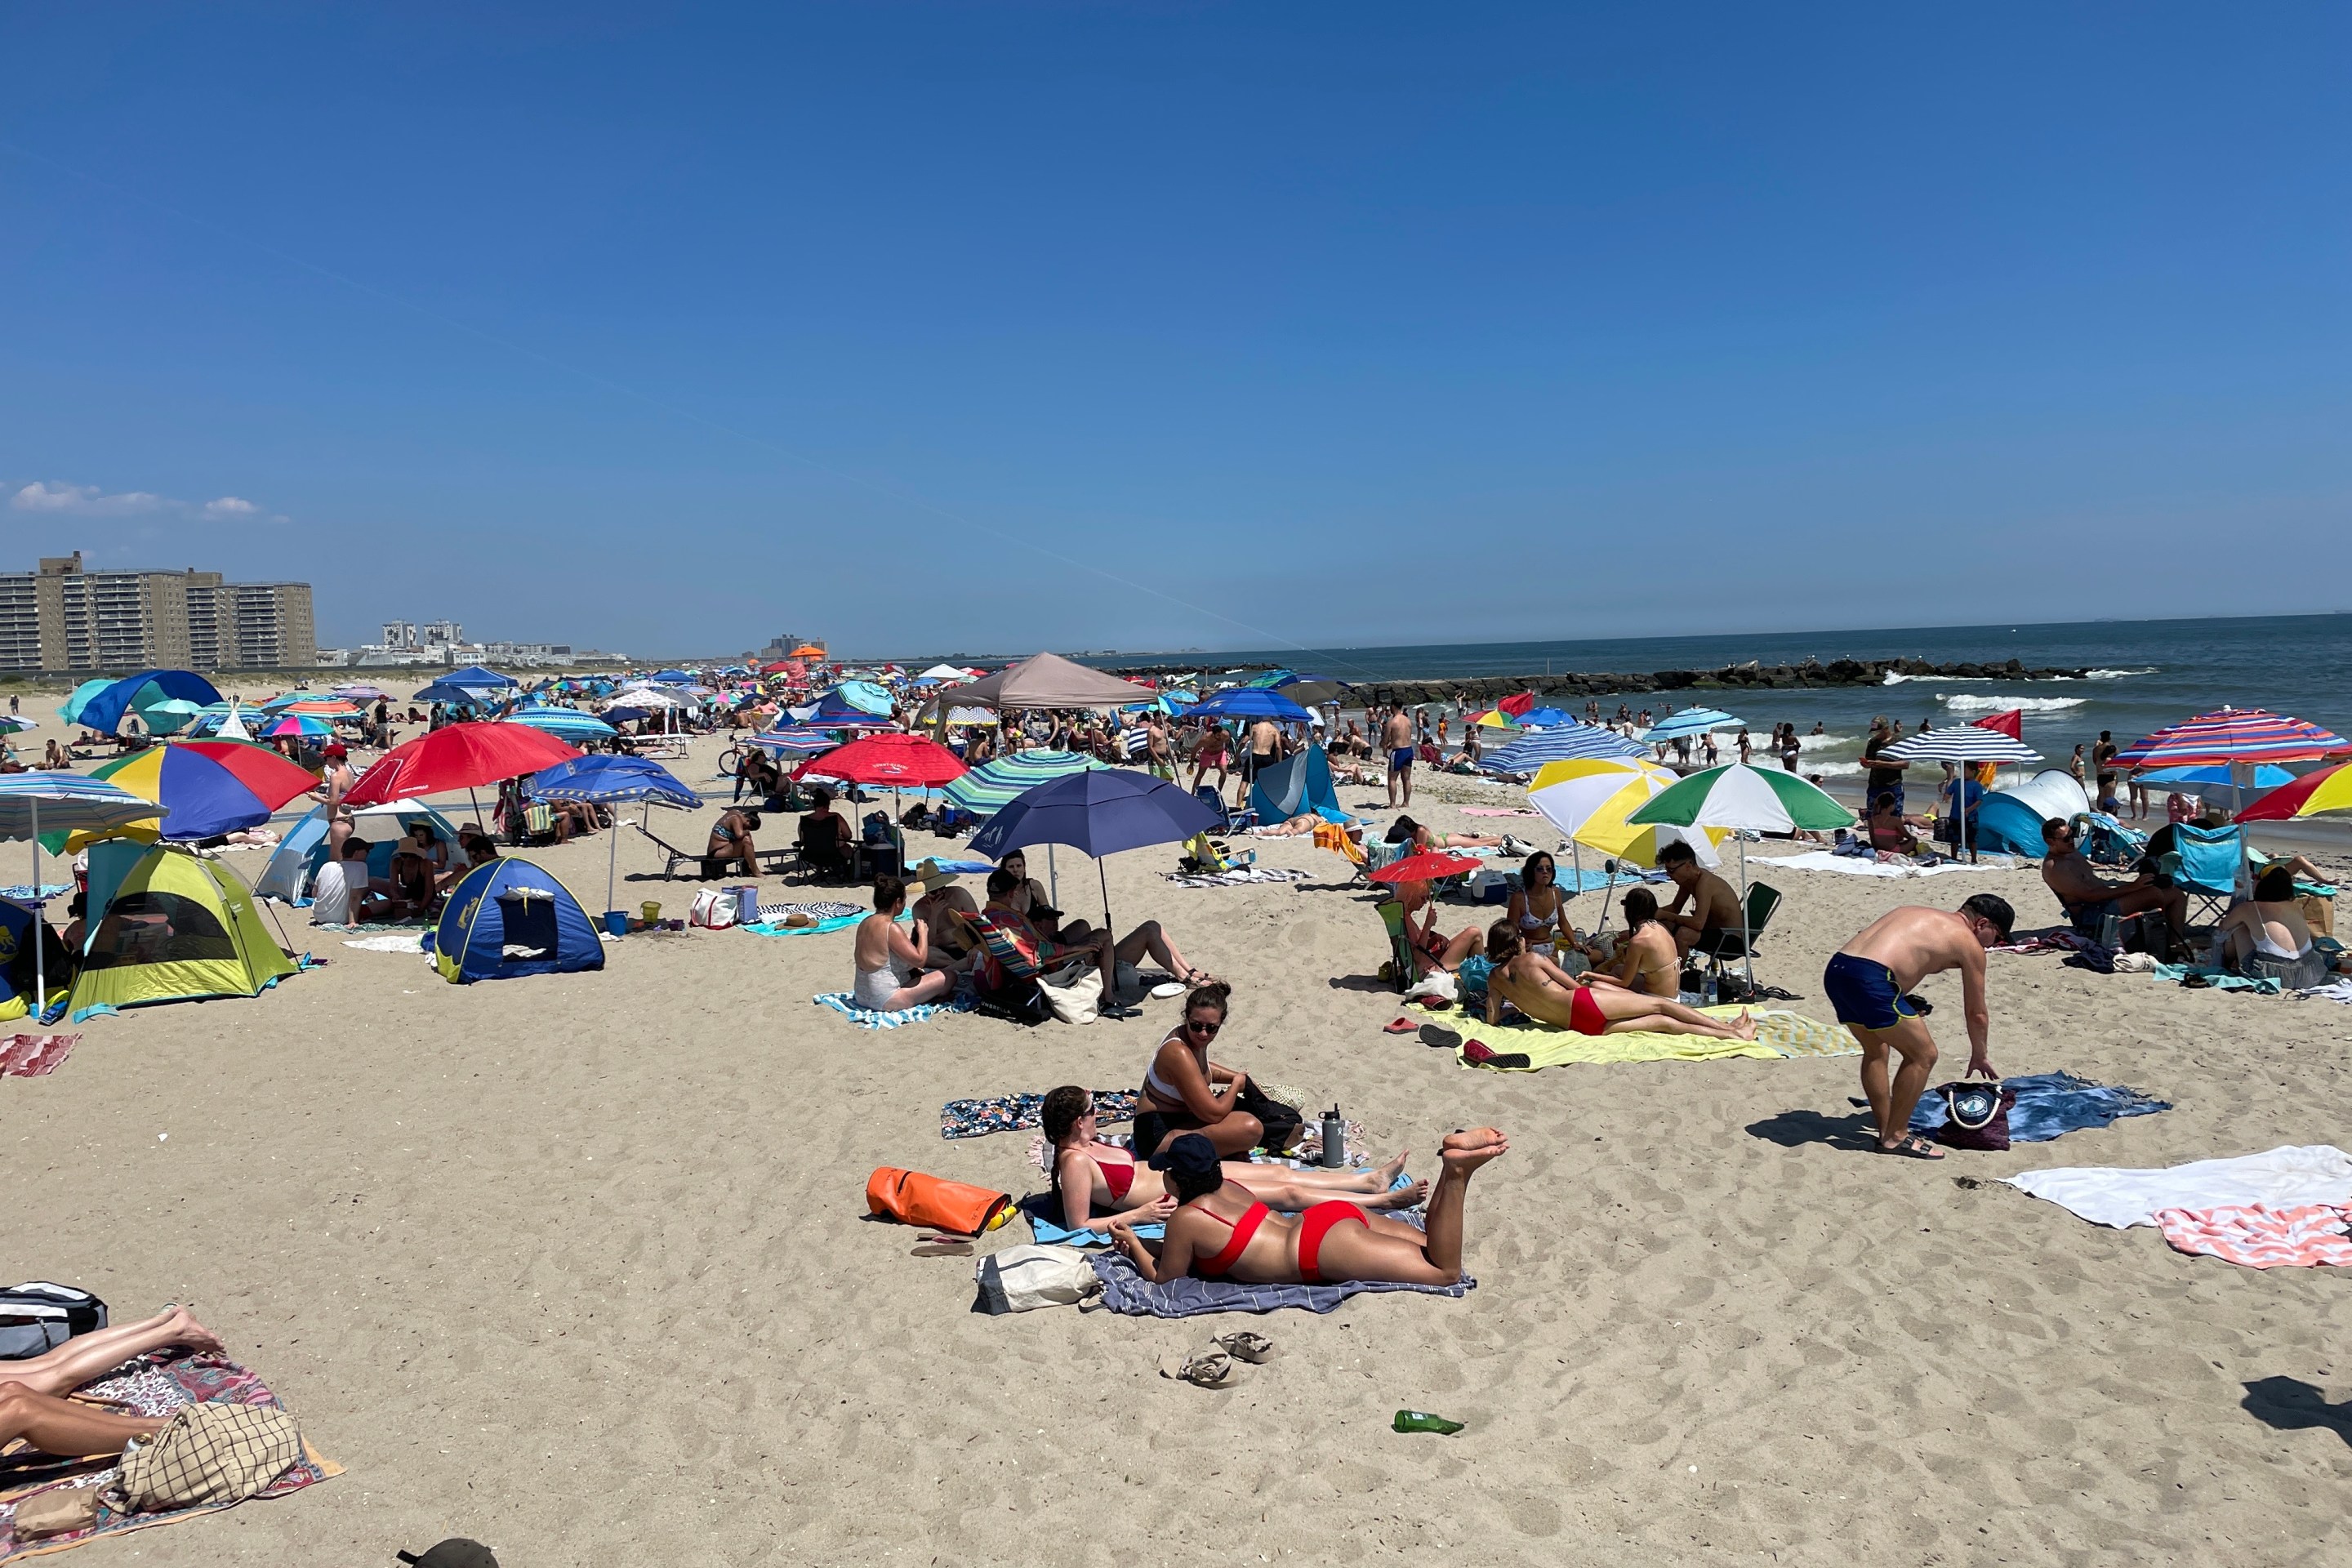 Hundreds of beachgoers sit on blankets on a brilliant summer day in the Rockaways.